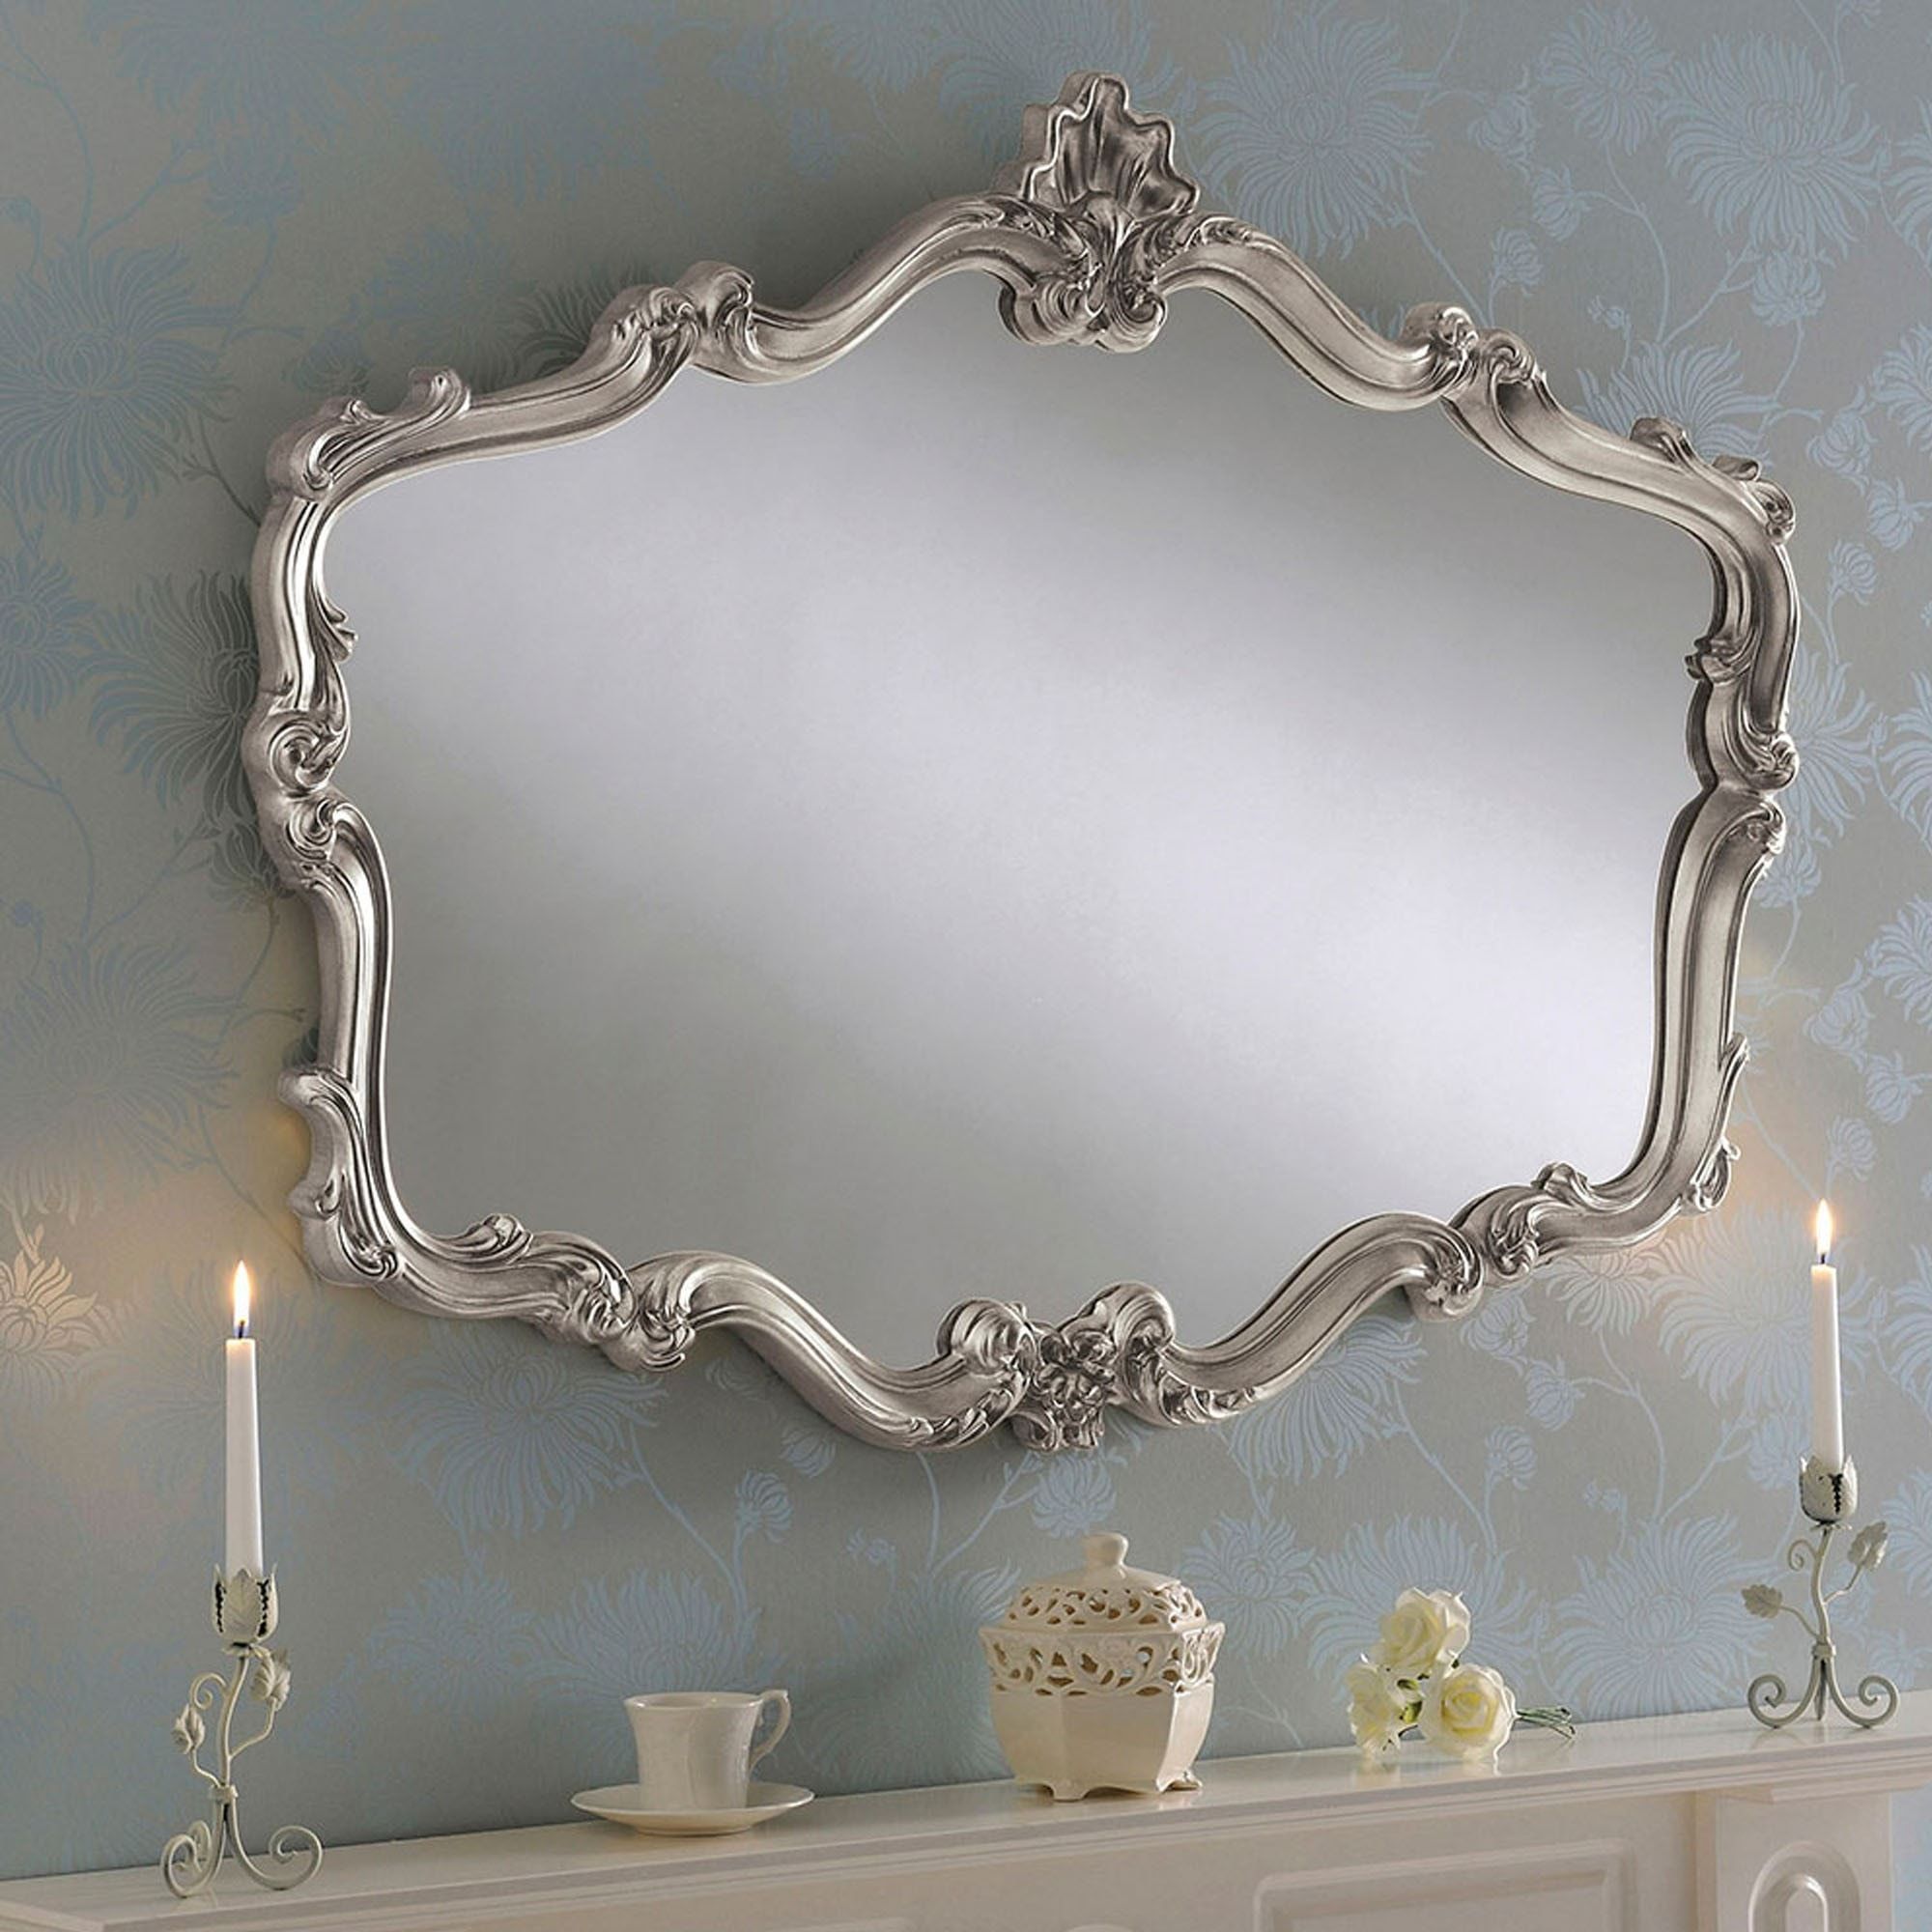 Antique French Style Silver Decorative Mirror | Silver Decorative Mirror Within Oval Metallic Accent Mirrors (View 9 of 15)